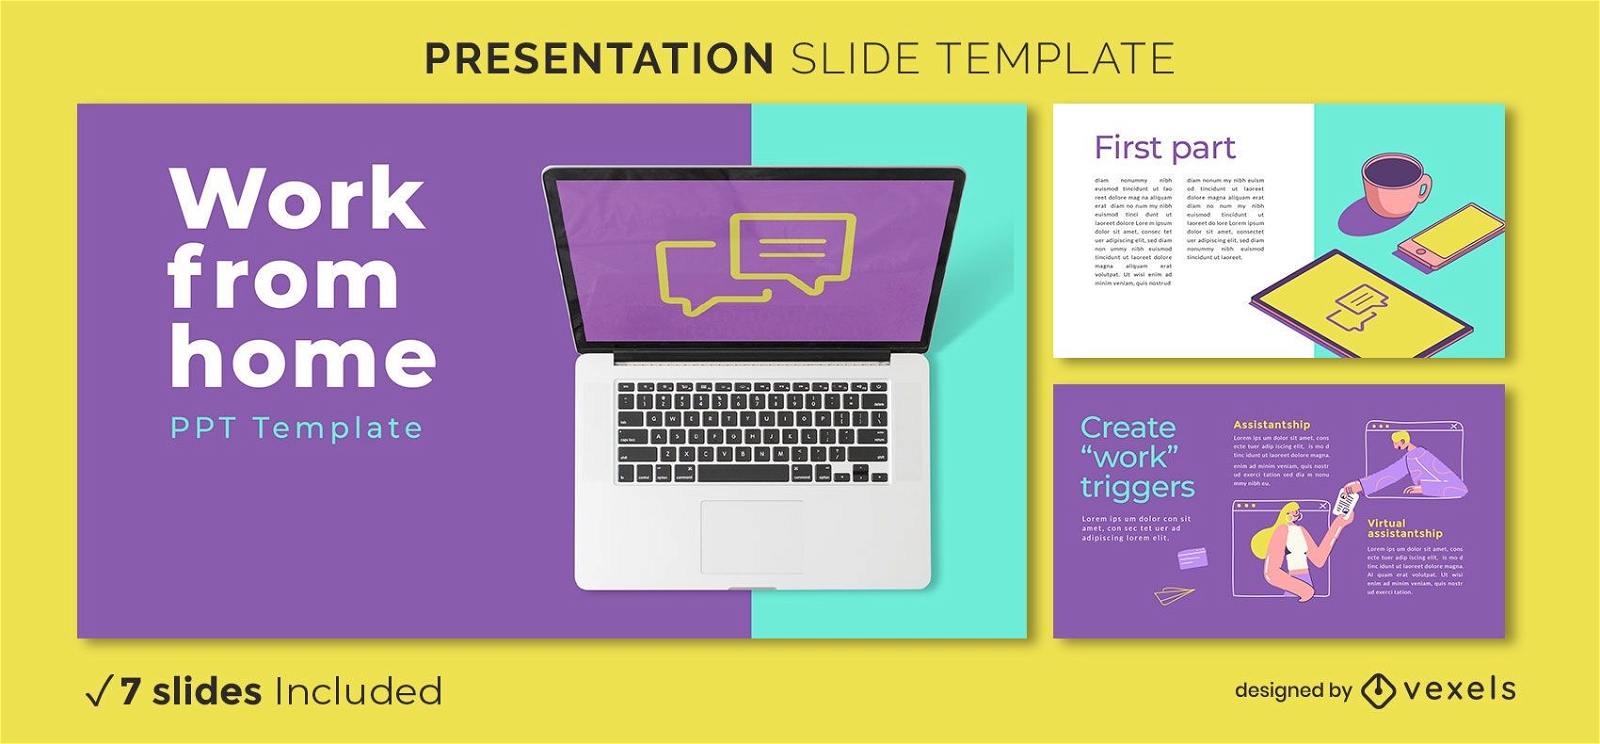 Work from home presentation template